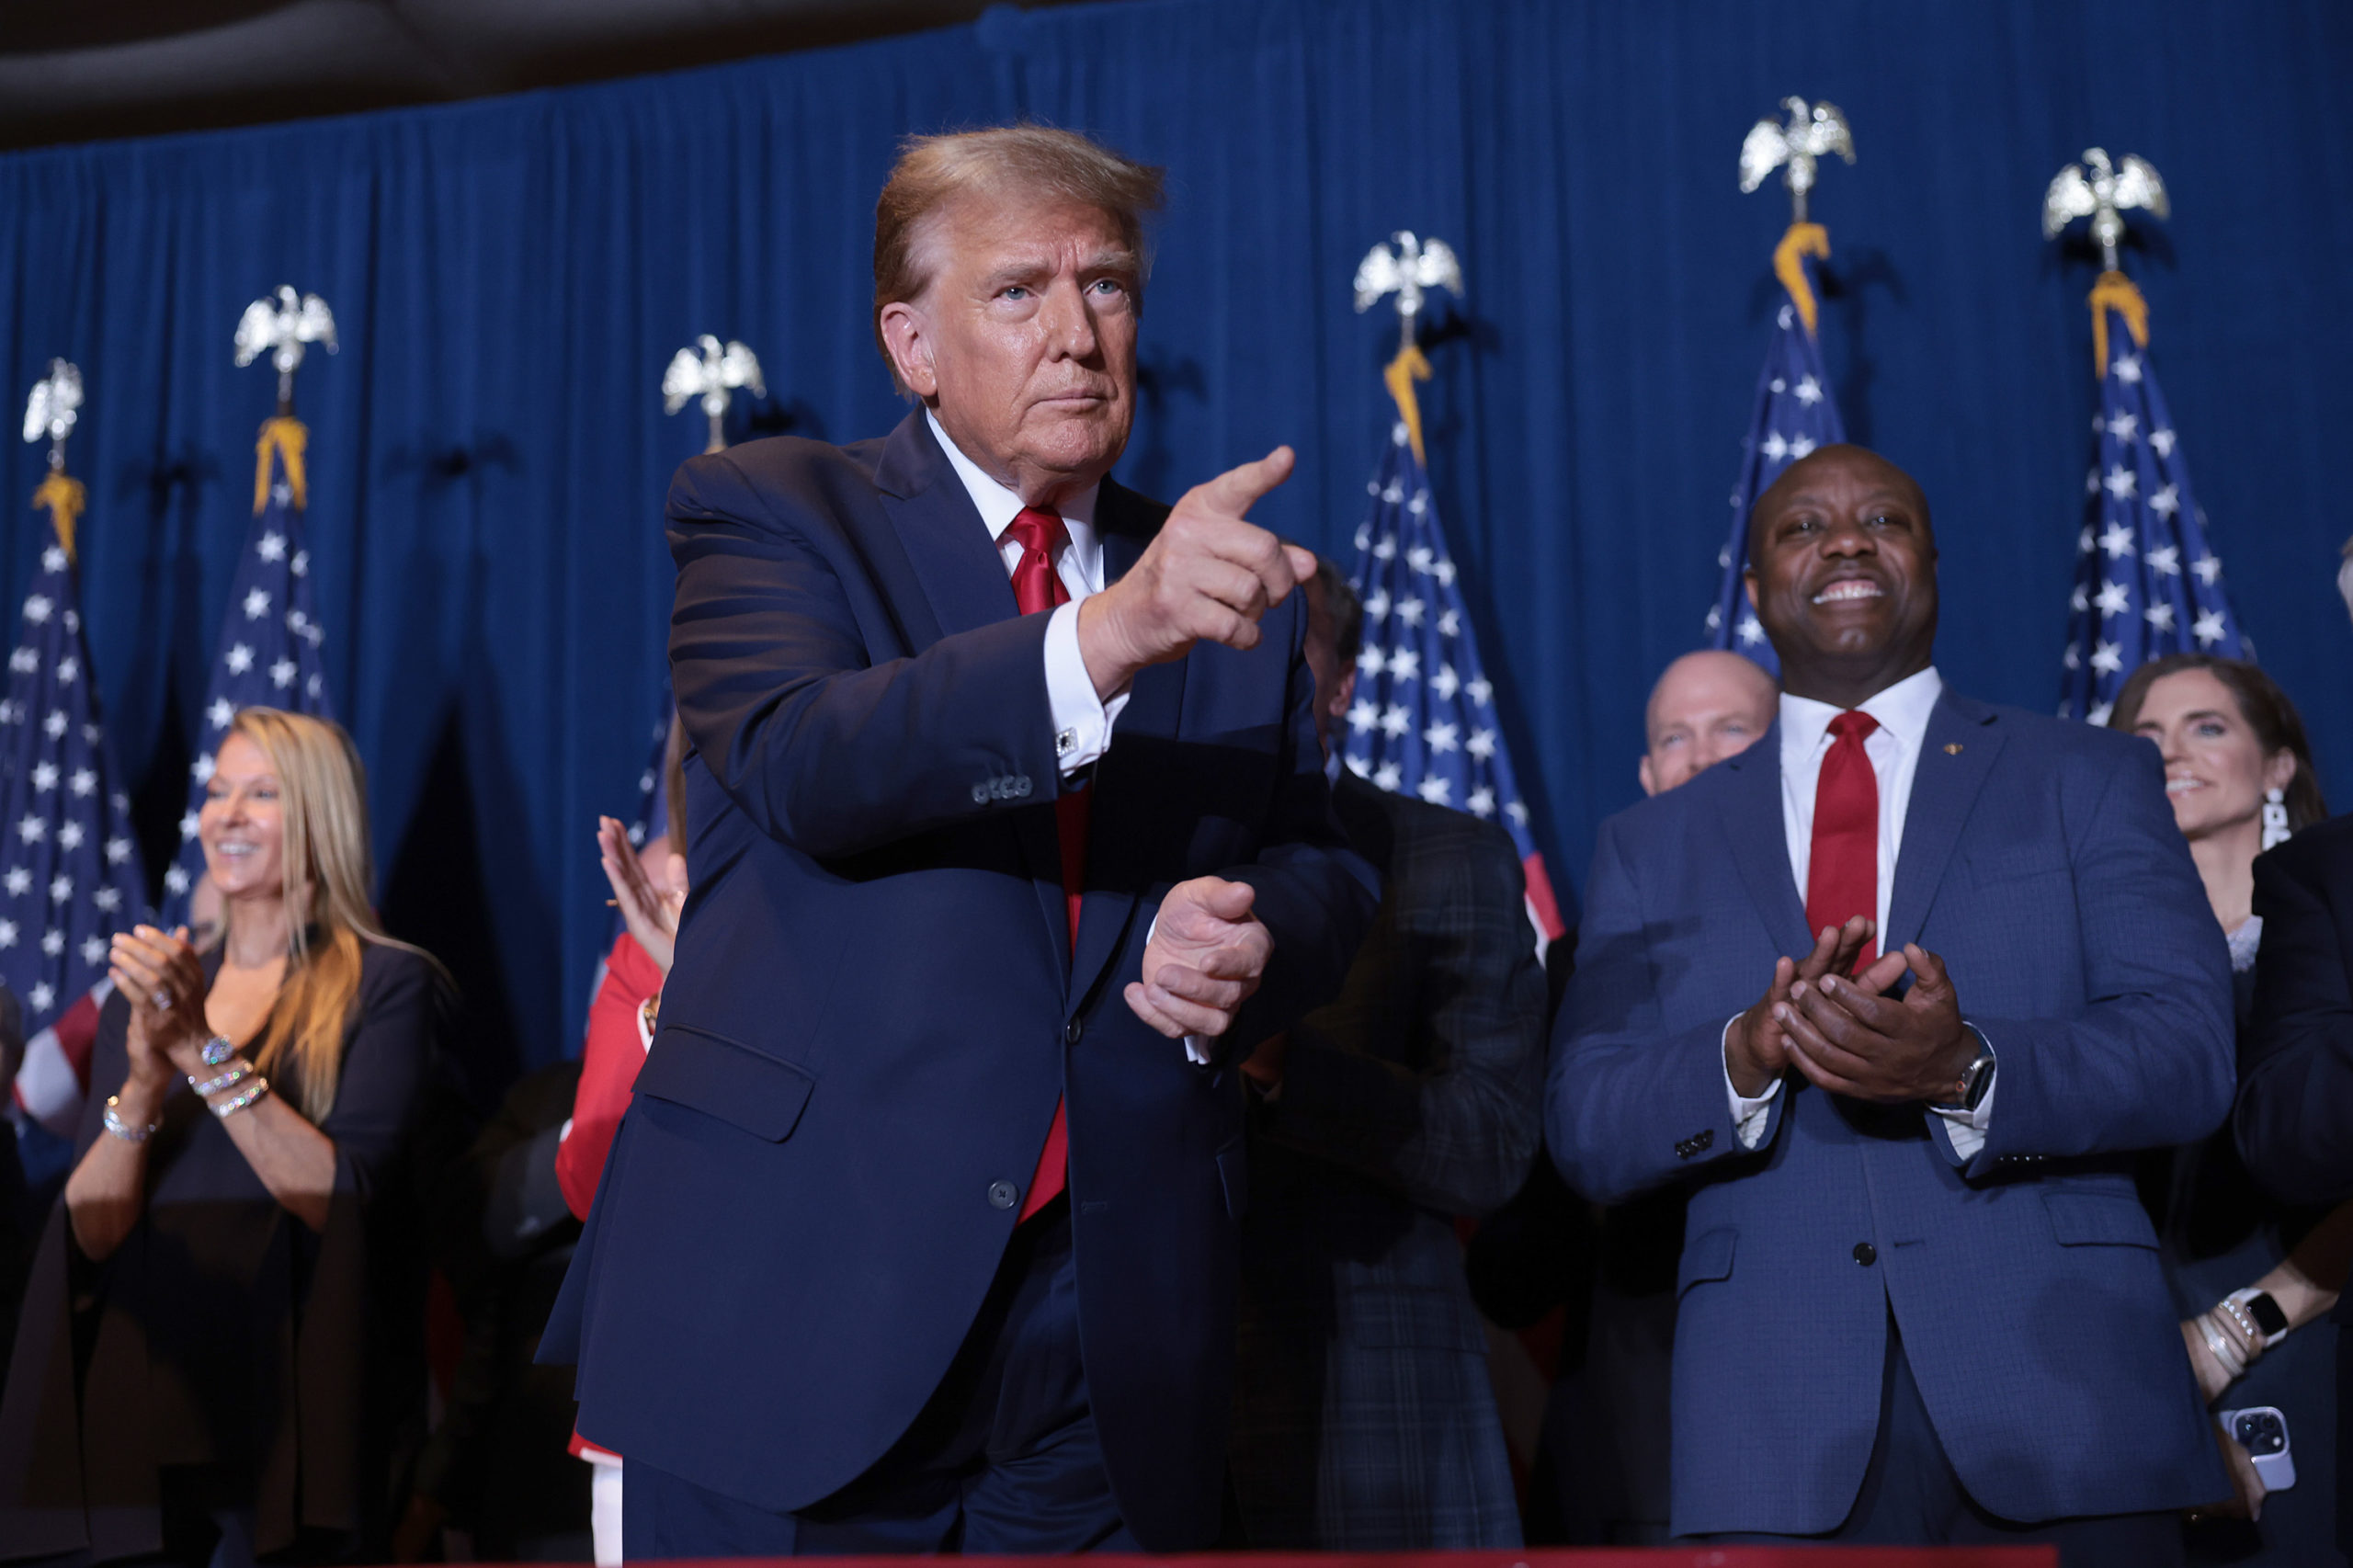 COLUMBIA, SOUTH CAROLINA - FEBRUARY 24: Republican presidential candidate and former President Donald Trump greets supporters during an election night watch party at the State Fairgrounds on February 24, 2024 in Columbia, South Carolina. South Carolina held its Republican primary today. (Photo by Win McNamee/Getty Images)